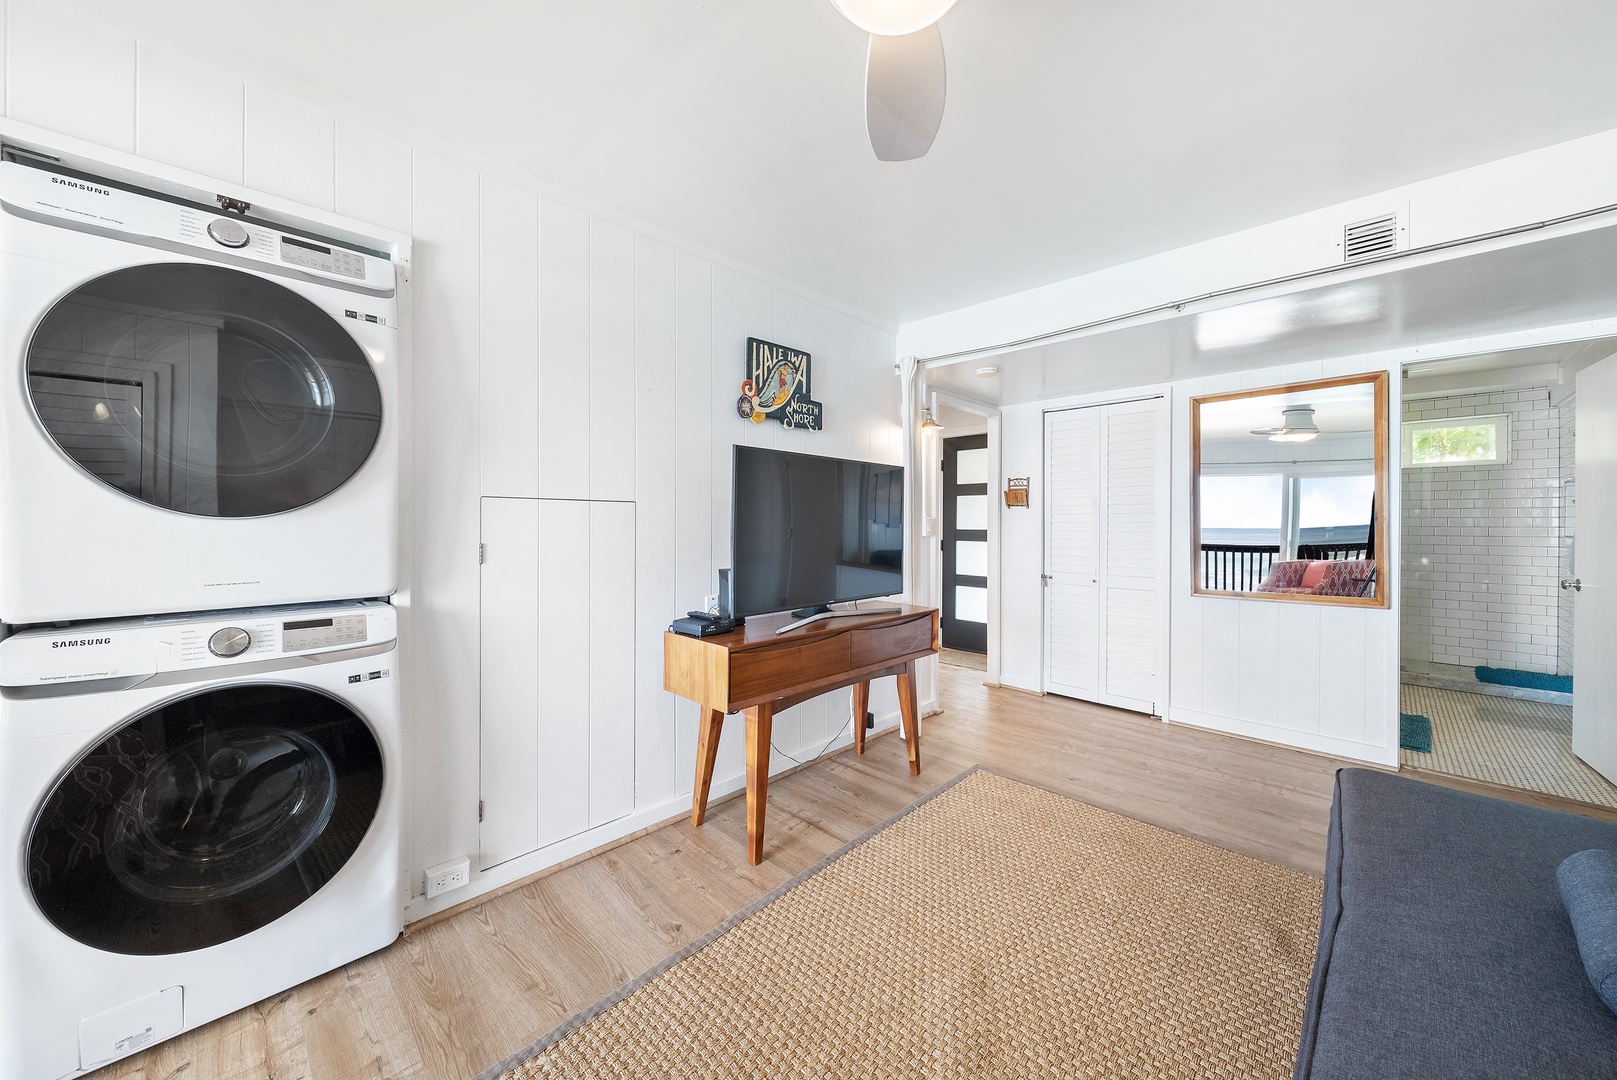 Haleiwa Vacation Rentals, Surfer's Paradise - In-unit washer and dryer for your convenience